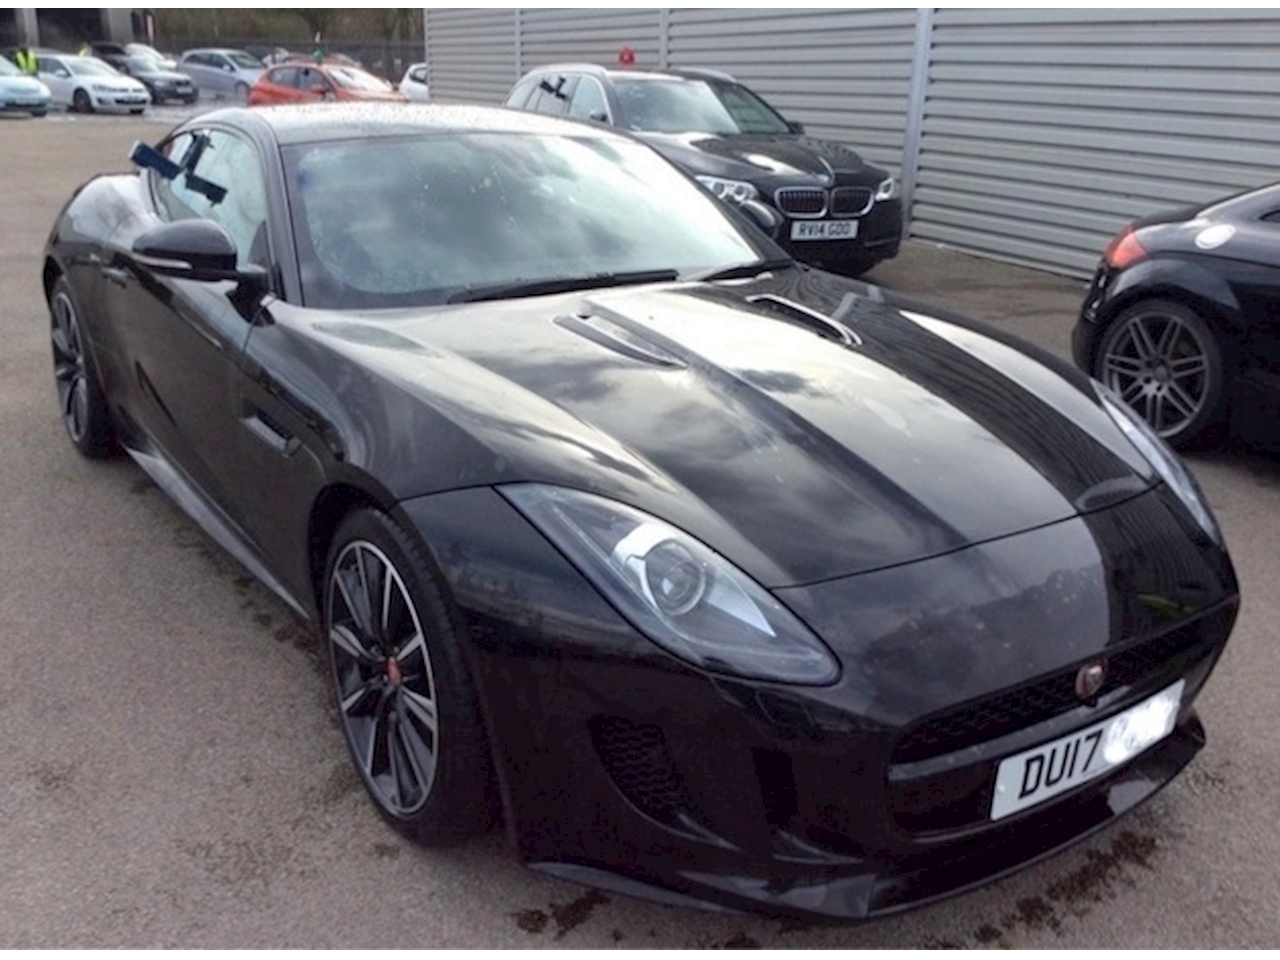 F-Type 3.0 V6 340 Supercharged Coupe 2dr Petrol Automatic (199 G/KM, 335 BHP) 2dr Coupe Automatic Petrol